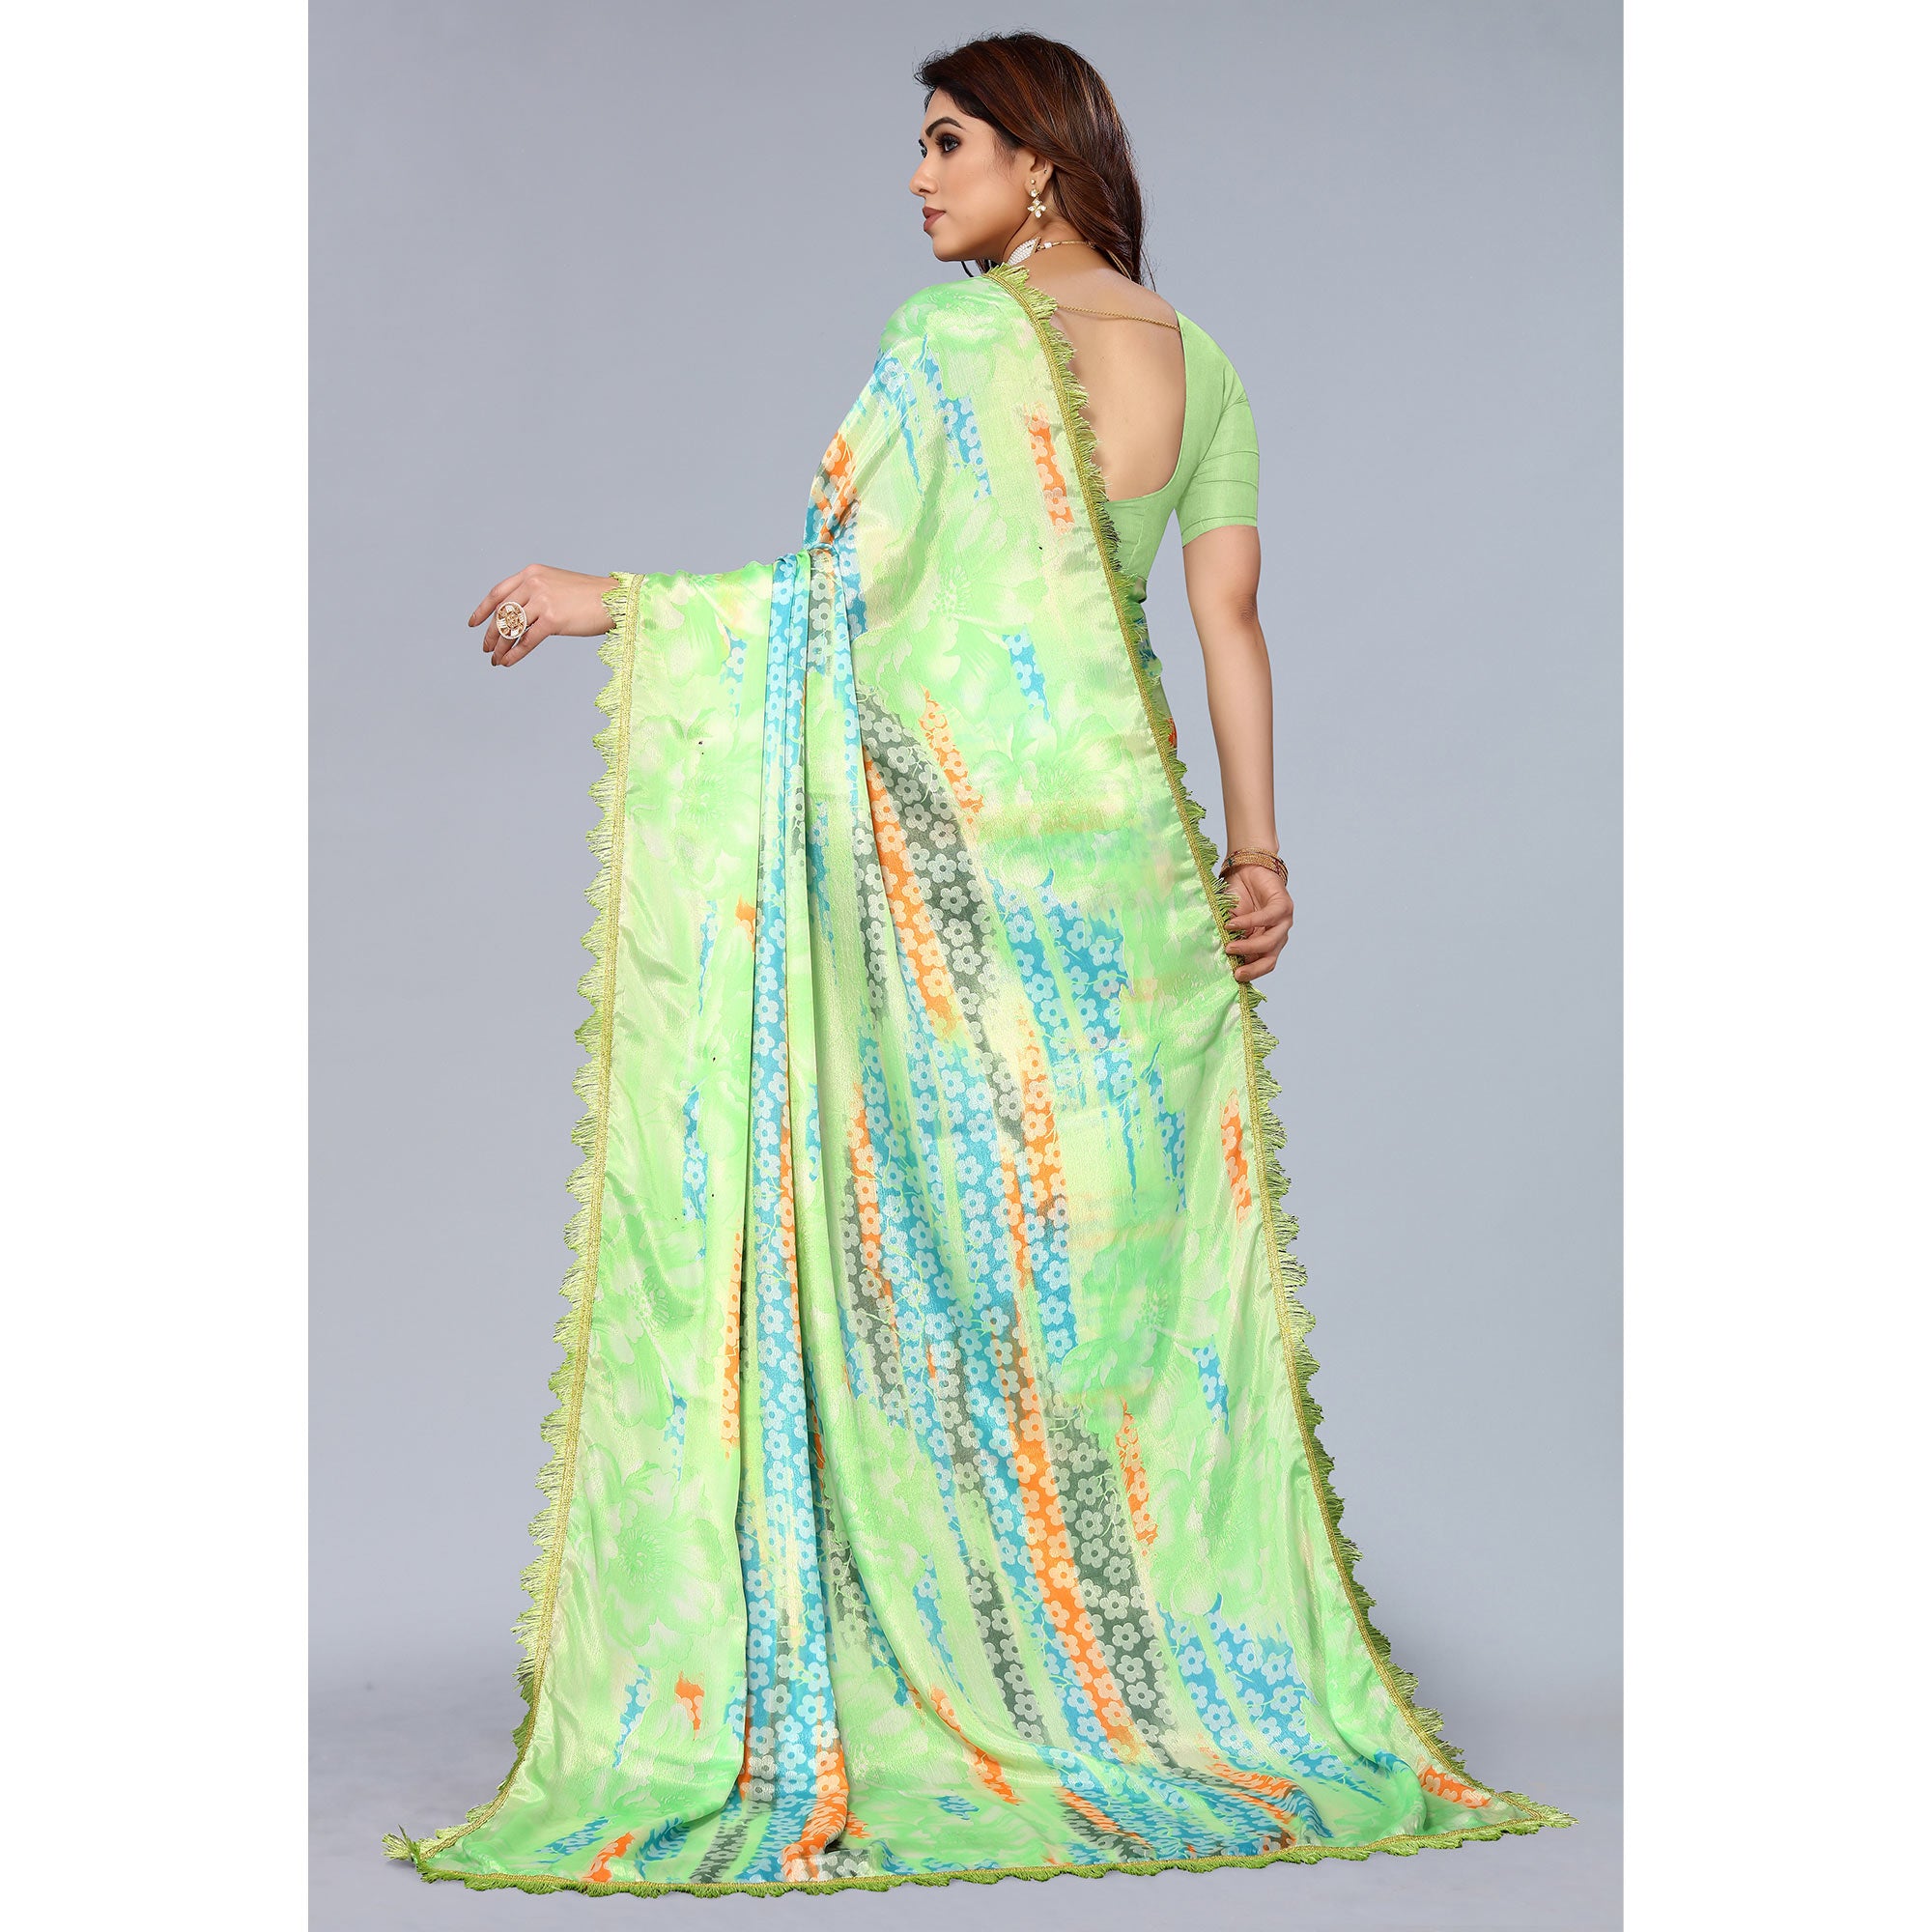 Parrot Green Floral Printed Art Silk Saree With Crochet Border